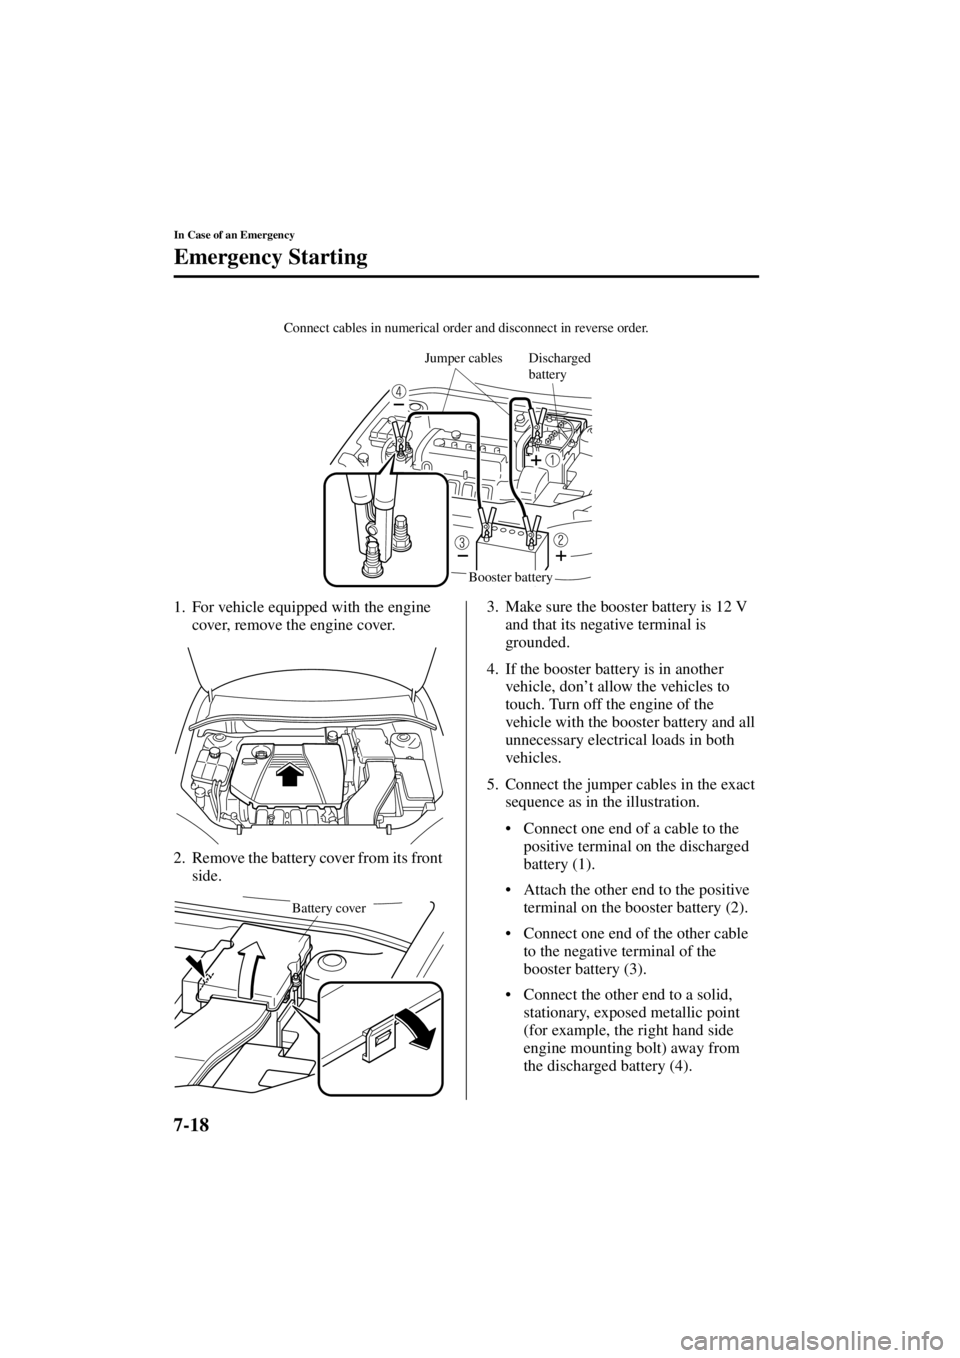 MAZDA MODEL 3 4-DOOR 2004  Owners Manual 7-18
In Case of an Emergency
Emergency Starting
Form No. 8S18-EA-03I
1. For vehicle equipped with the engine cover, remove the engine cover.
2. Remove the battery cover from its front  side. 3. Make s